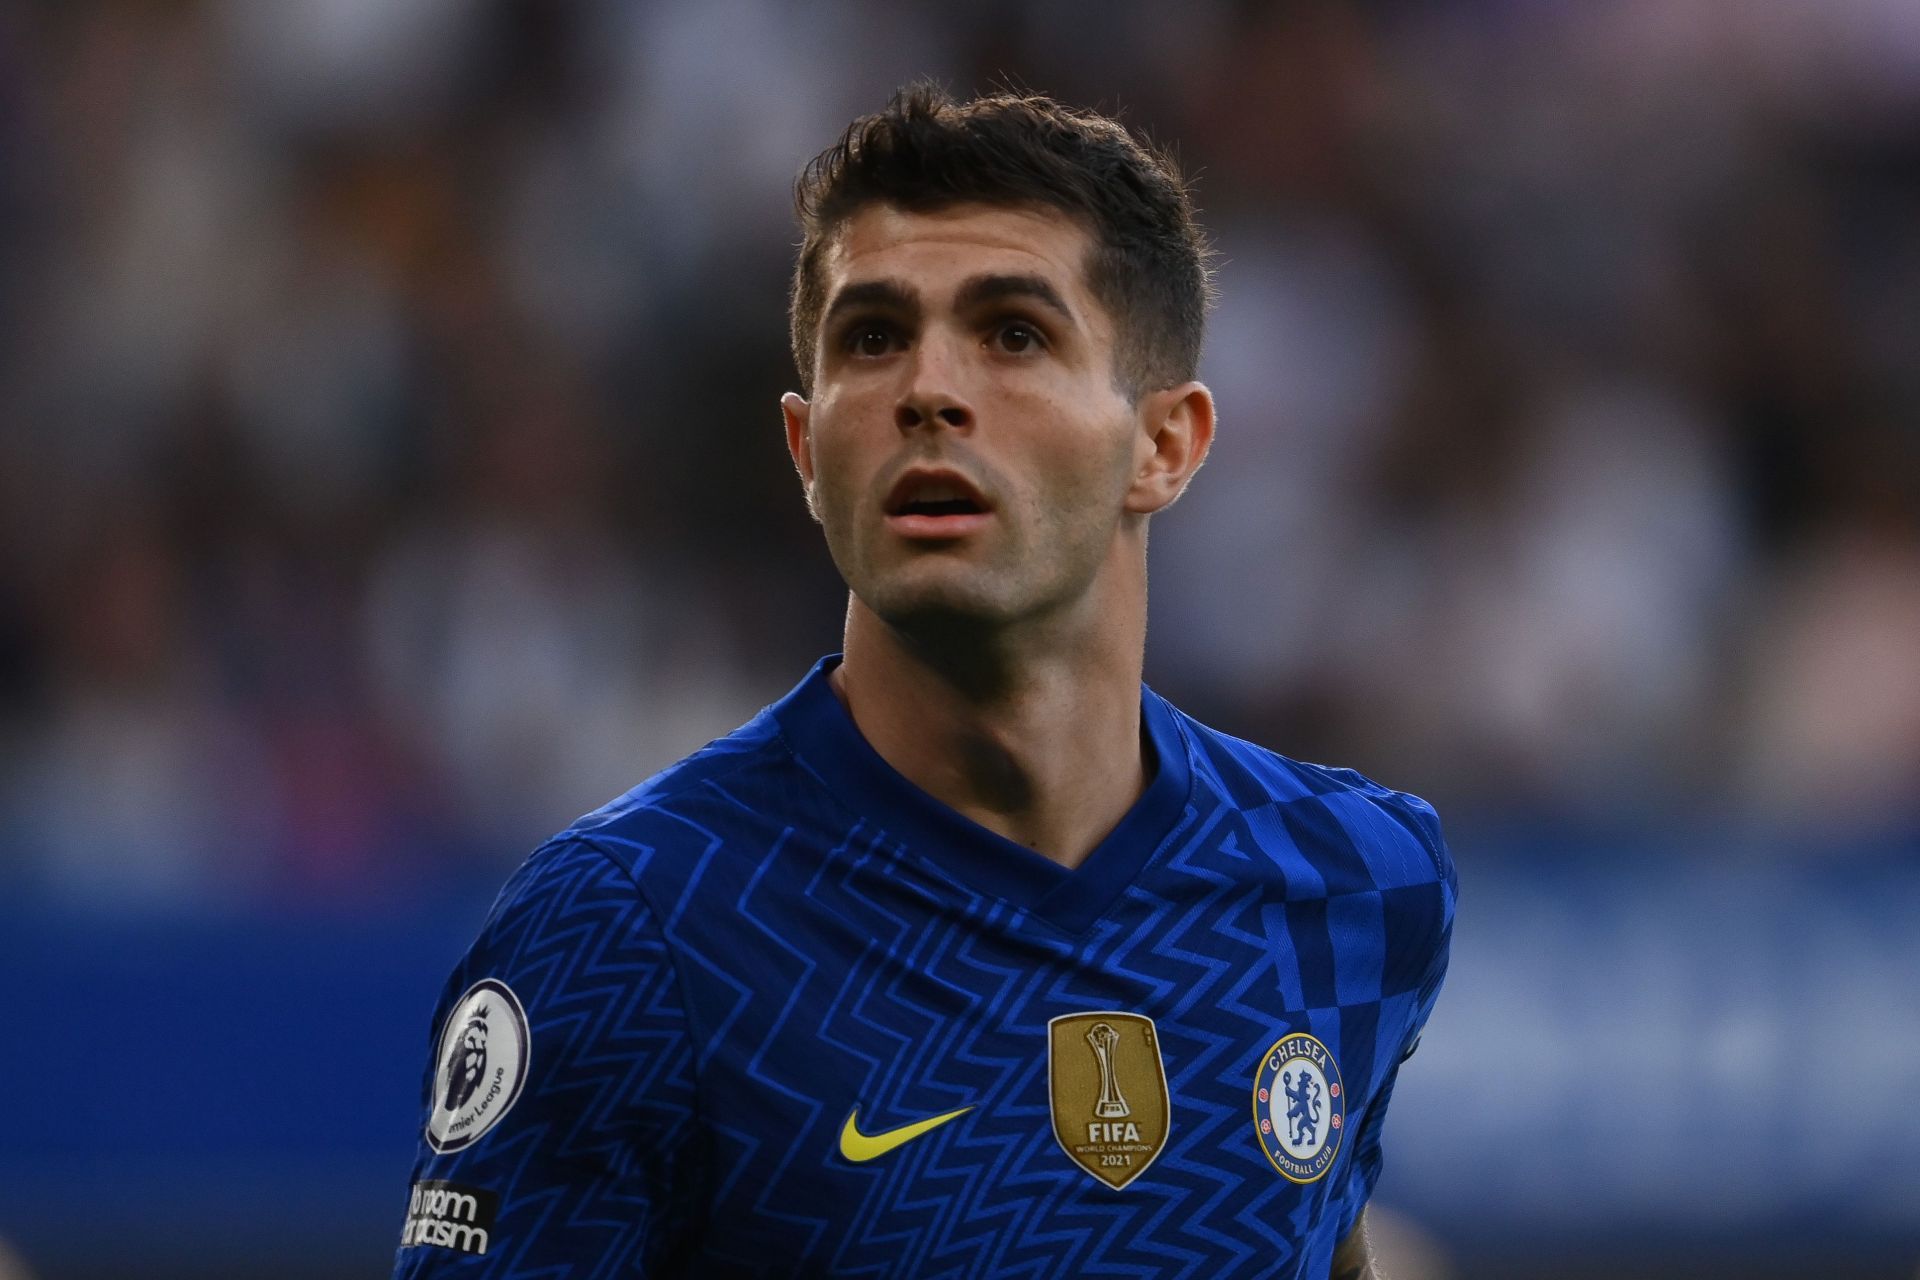 American winger Christian Pulisic could be on the move this summer.